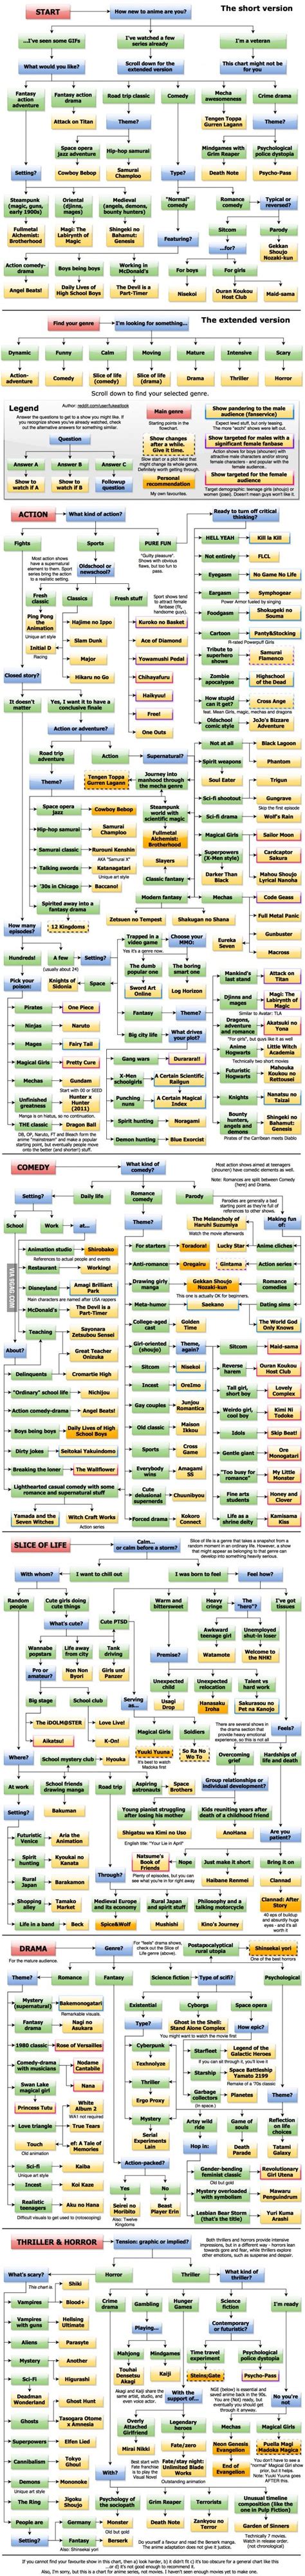 anime recommendation flowchart for beginners and not only by genre anime recommendations